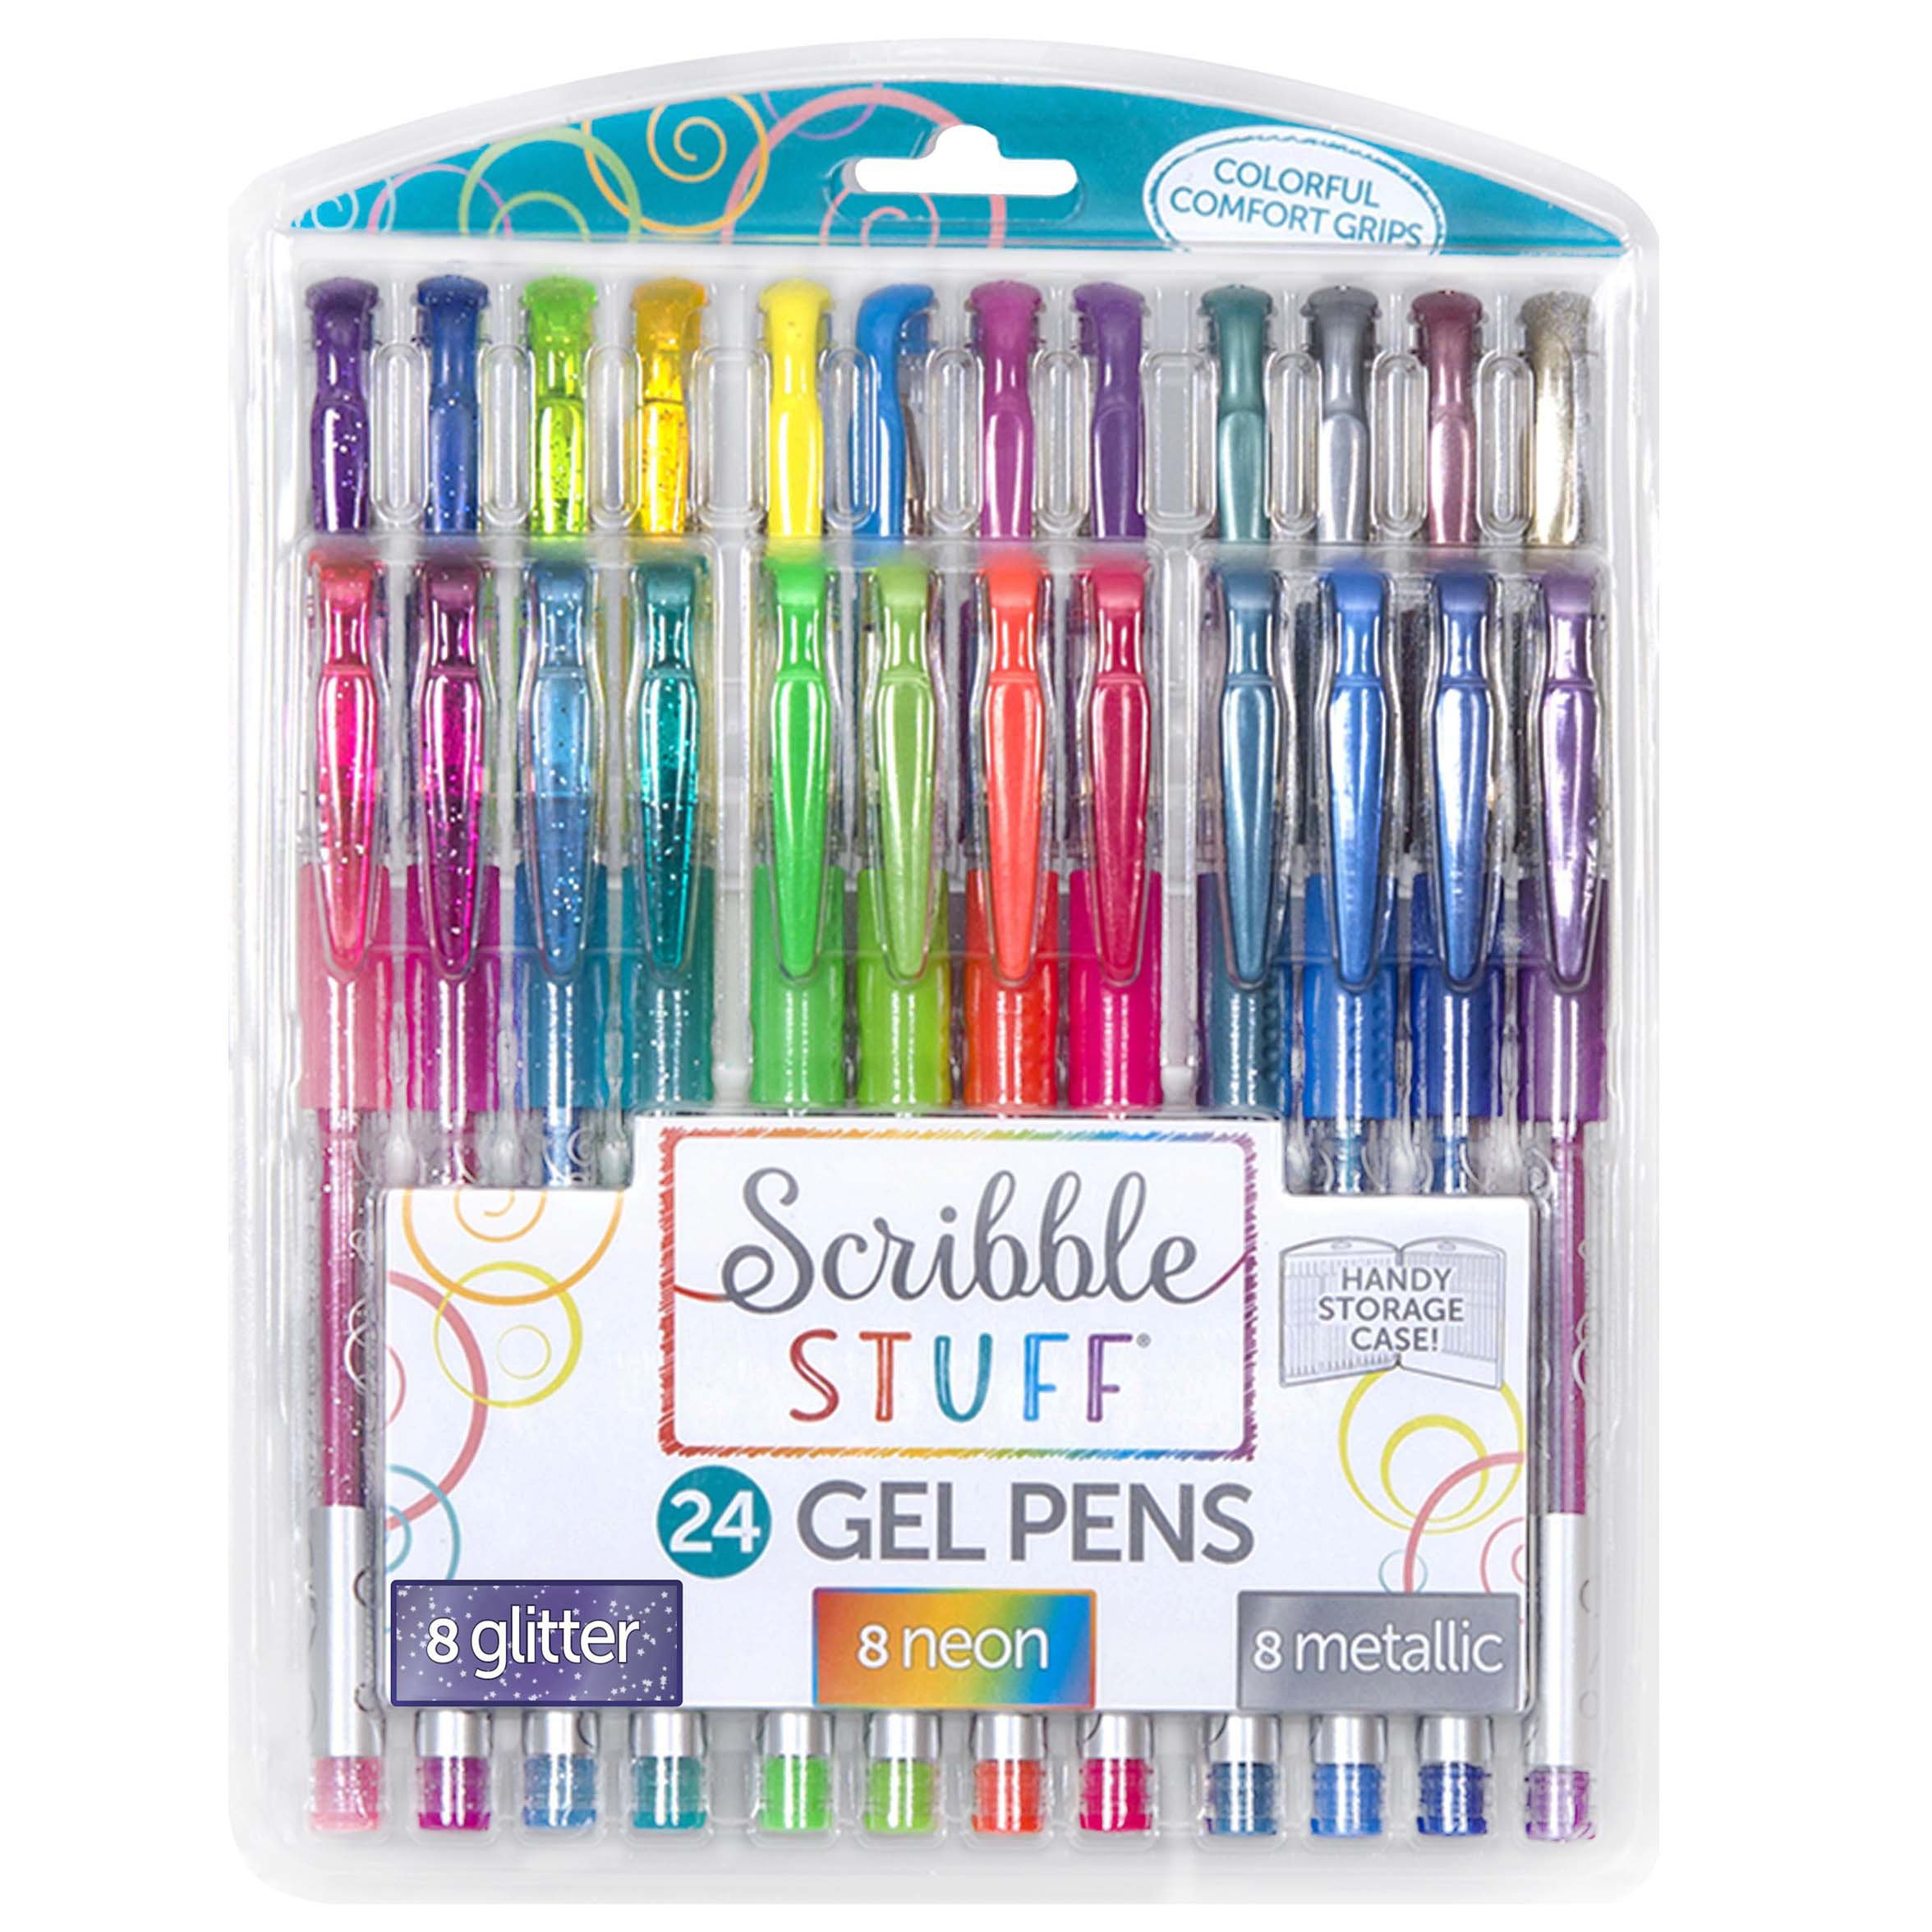 Blieve Gel Pens - Earthy, Matte Finish, Smooth Writing, No Bleed - for Journaling, Bible Notes, Drawing - Cute School Supplies, 8 Pack